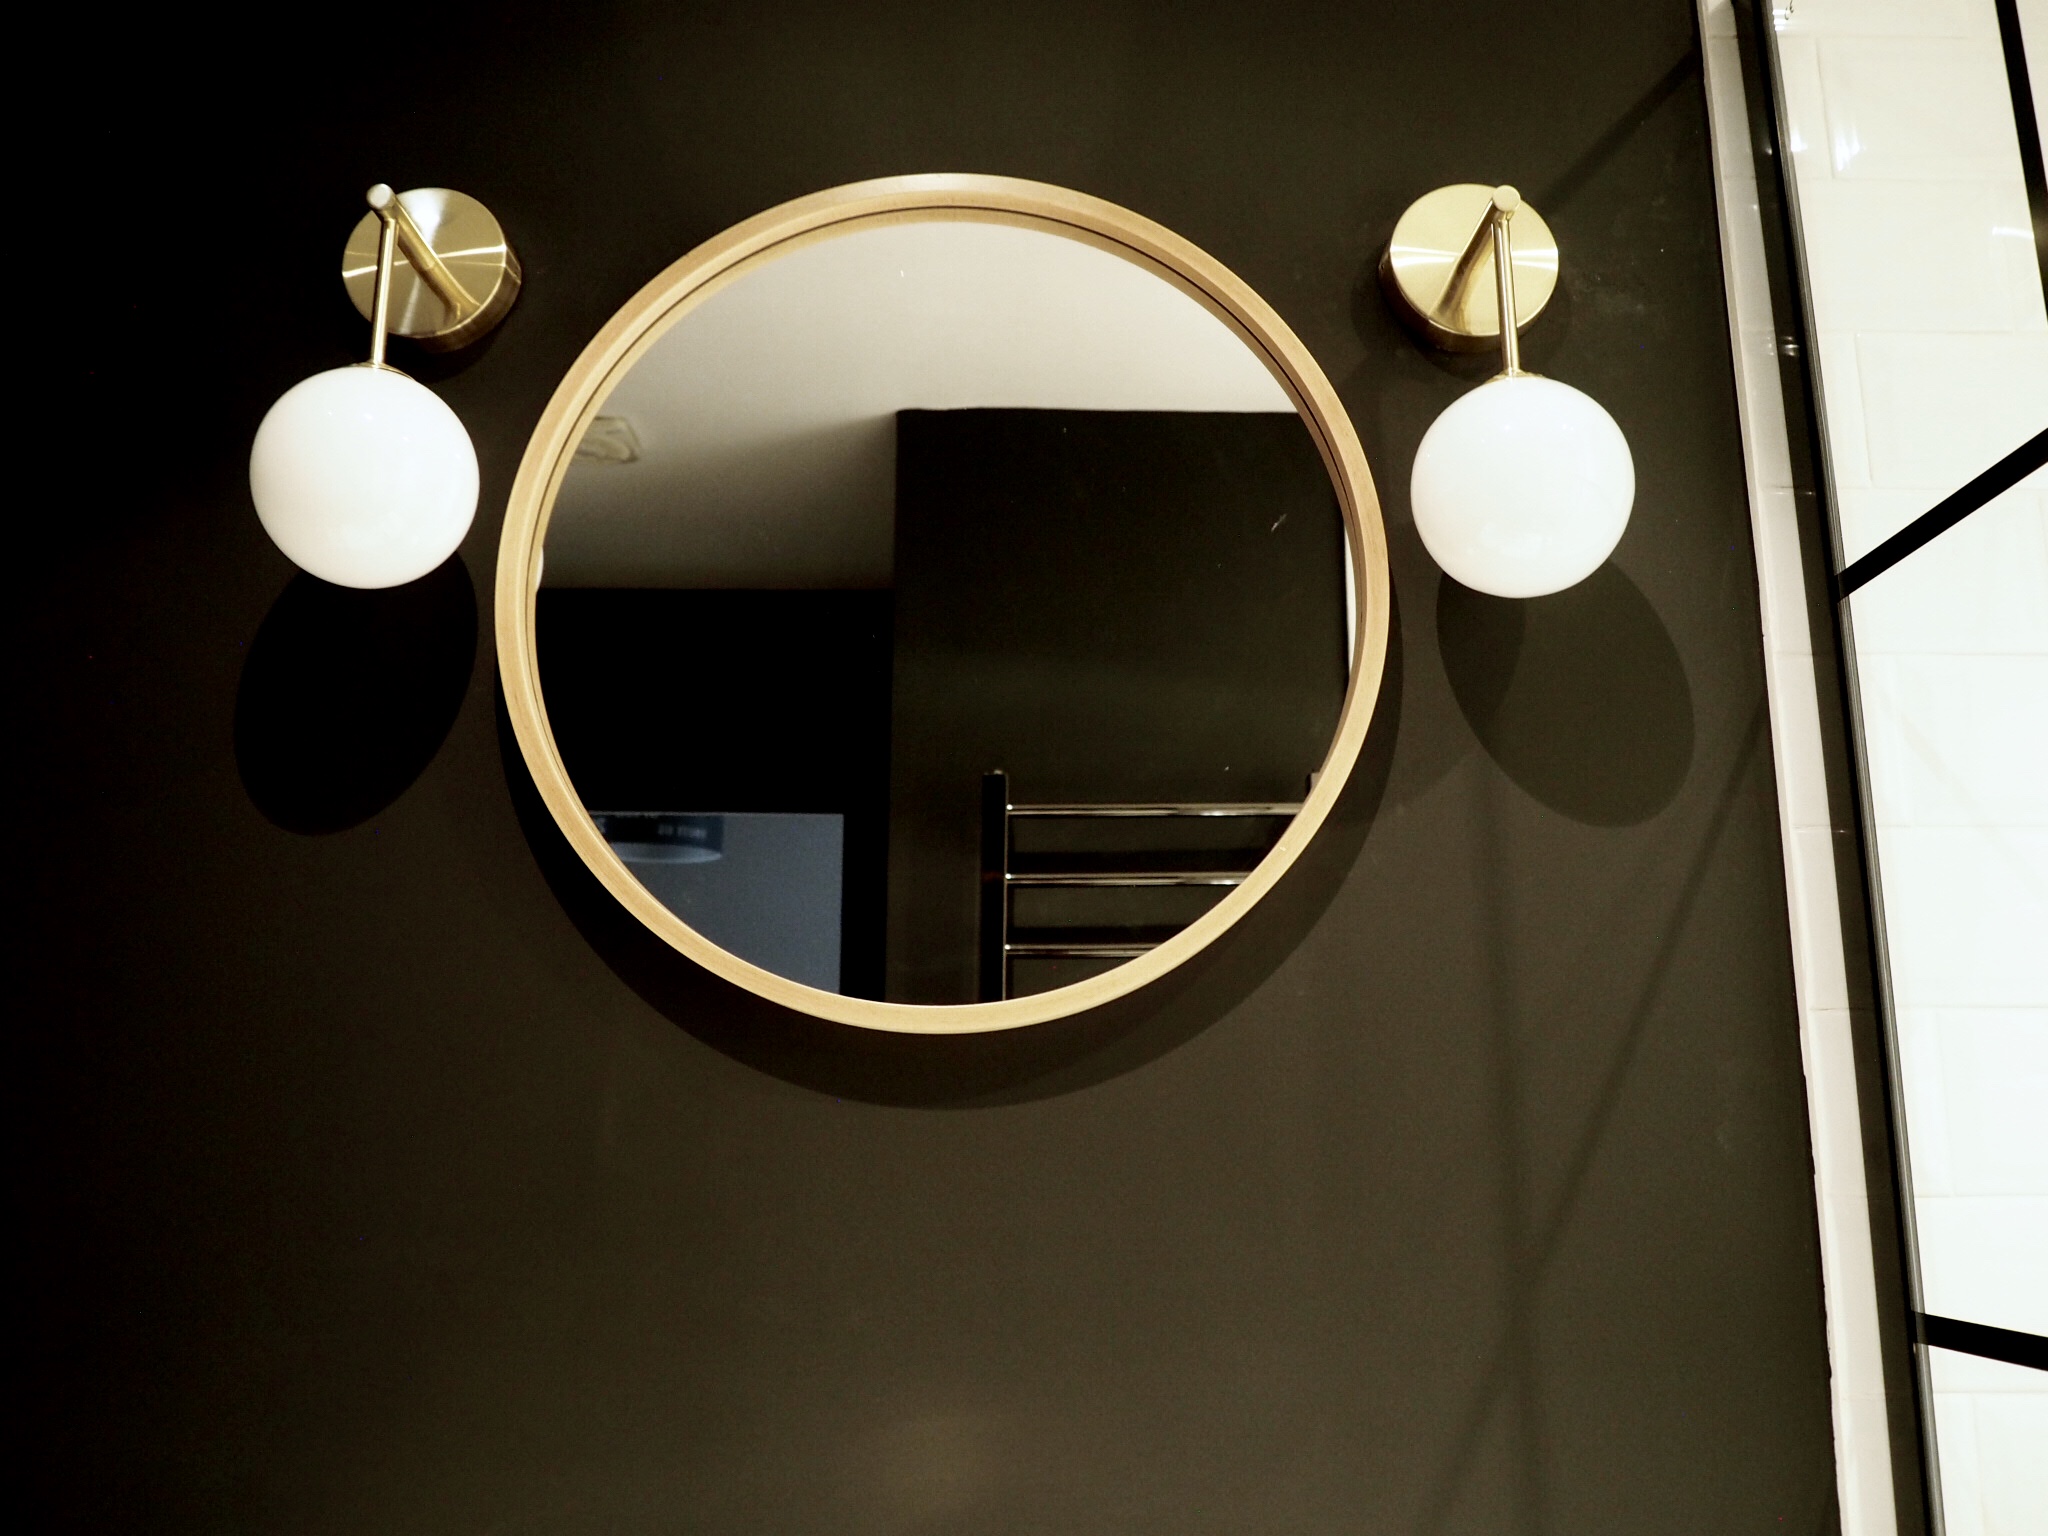 Round wood Zara Home mirror framed by two gold and white wall lights